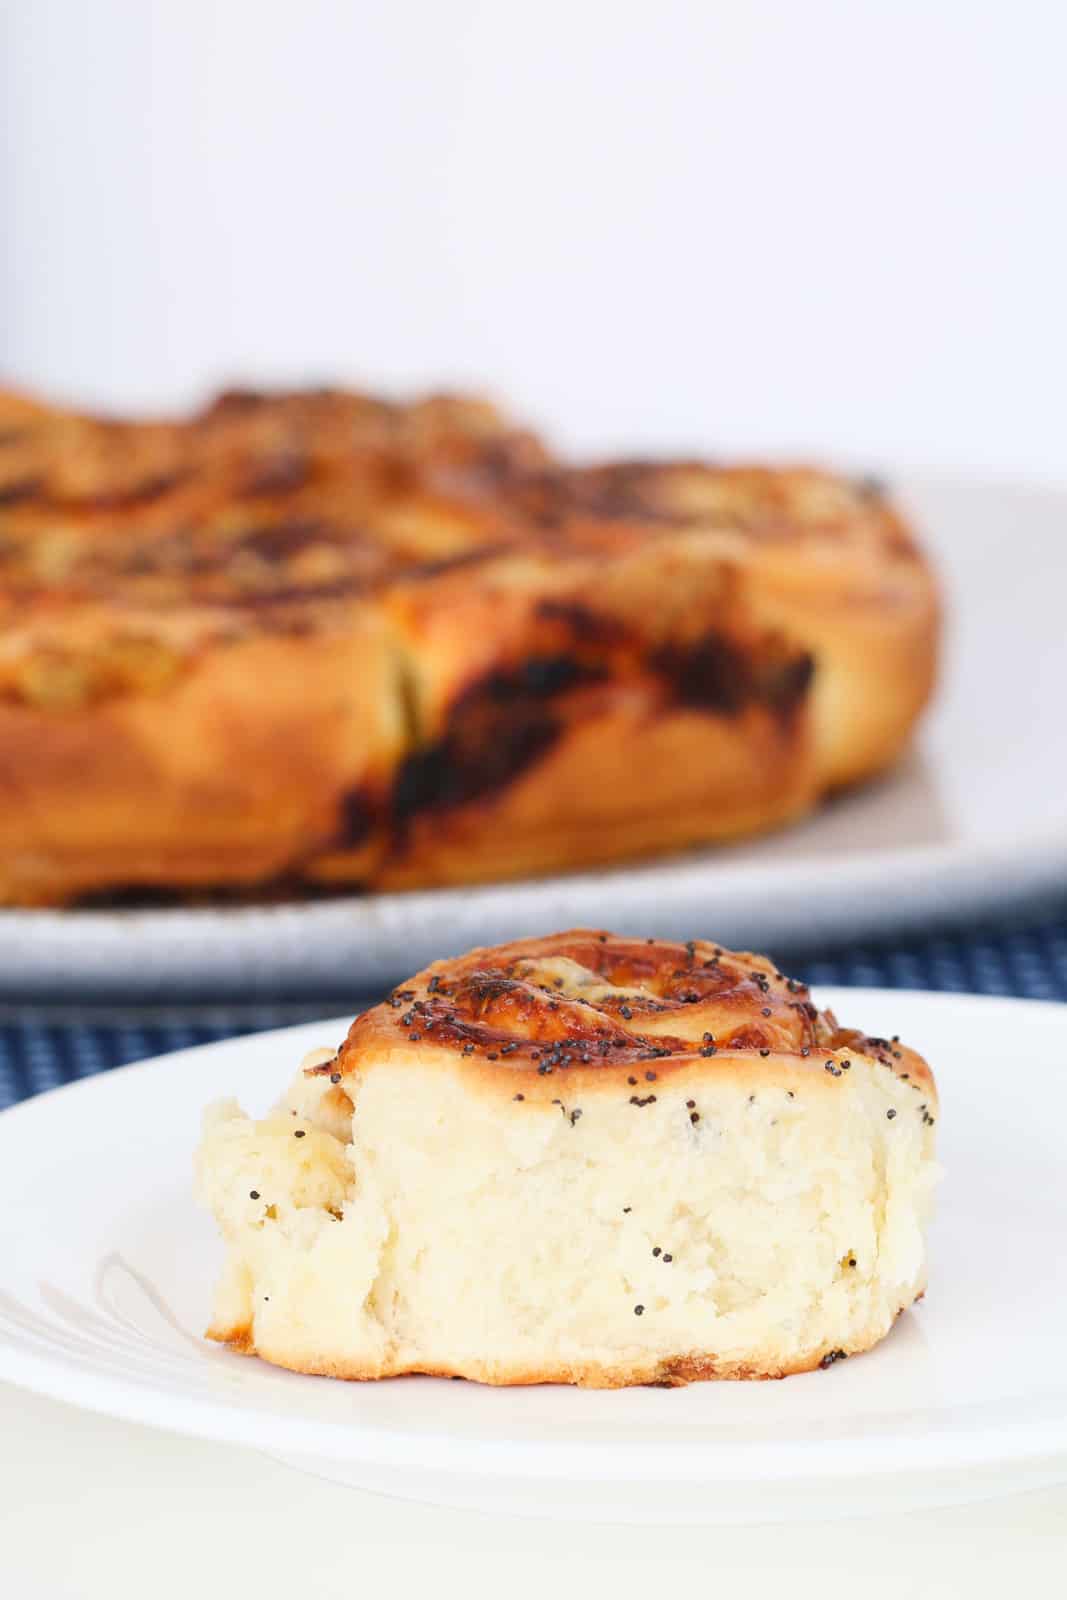 A fluffy white scroll on a plate with a golden top and poppyseeds sprinkled over.